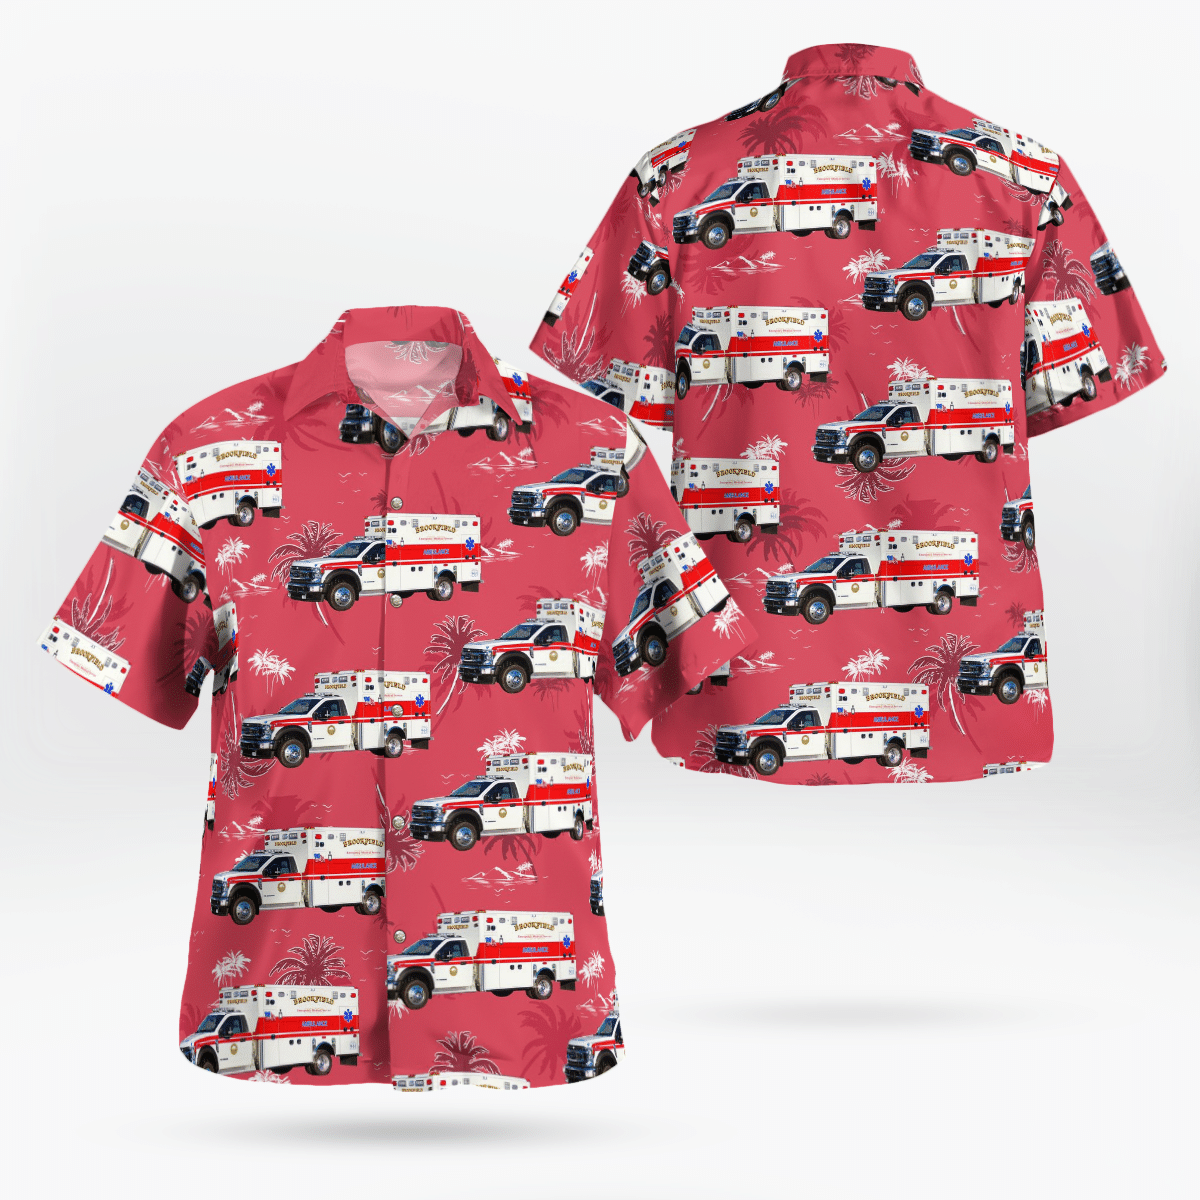 Top Hawaiian shirts are perfect for hot and humid days 167